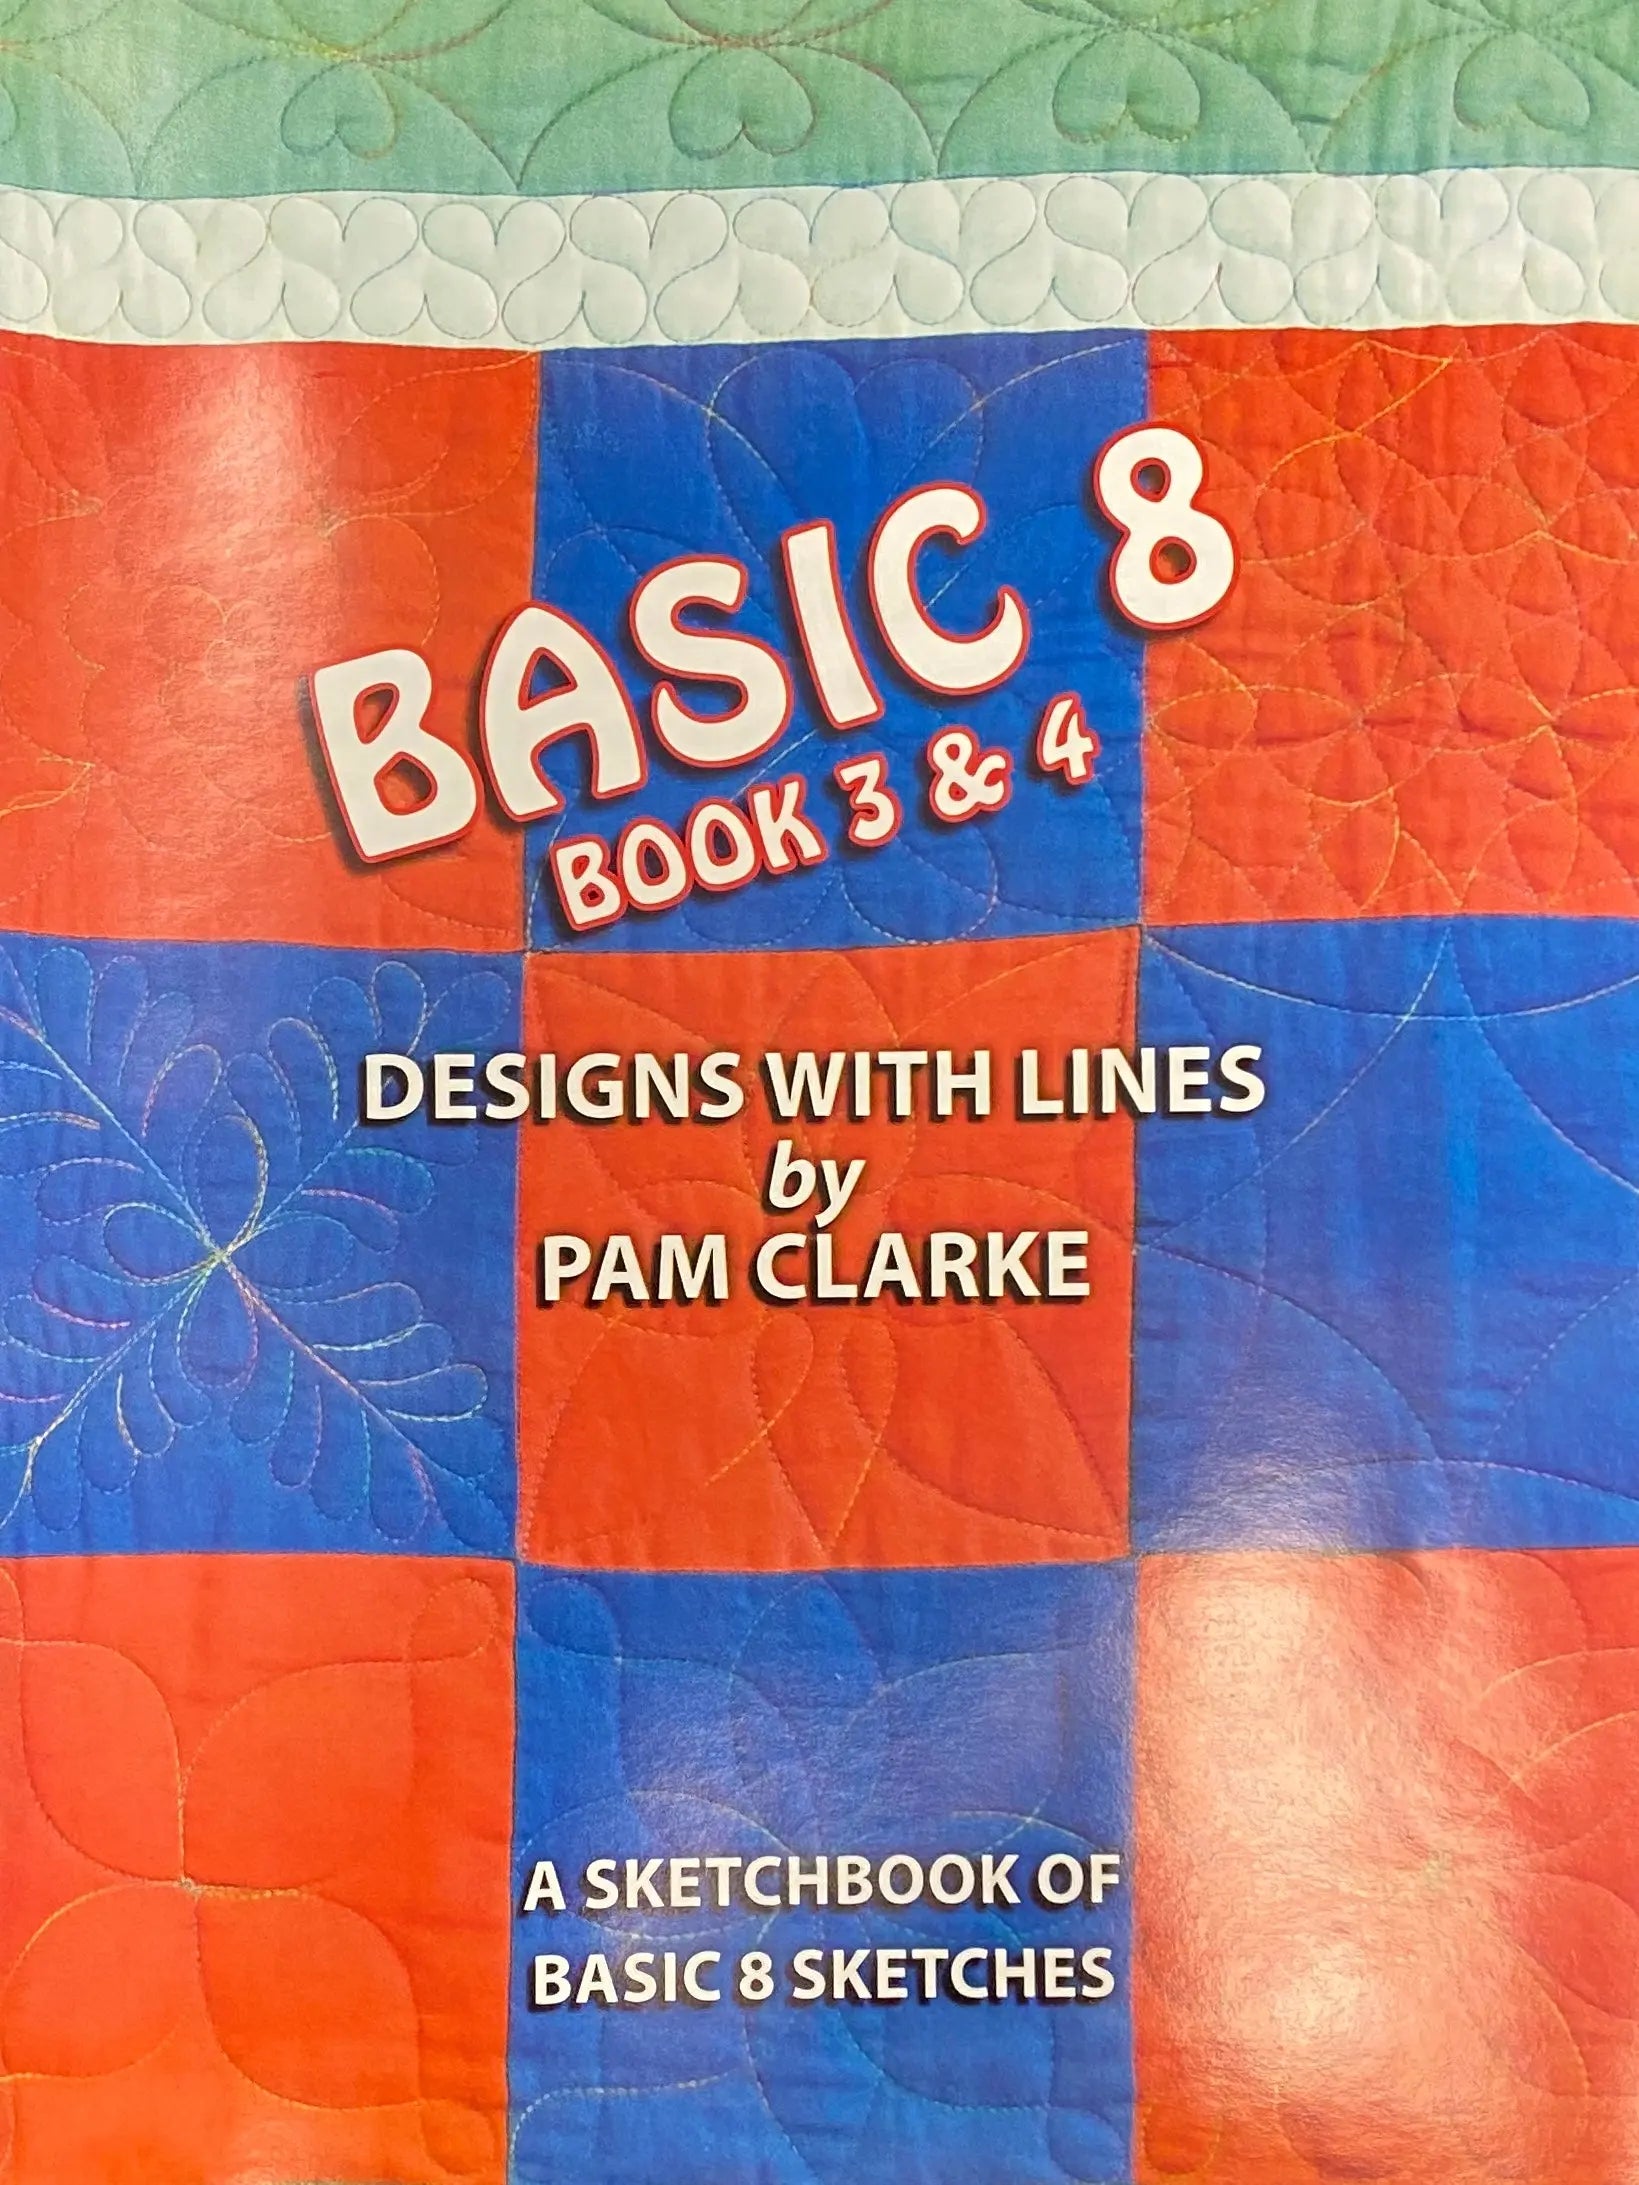 1887 Basic 8 Lines Book 3 & 4 - Linda's Electric Quilters